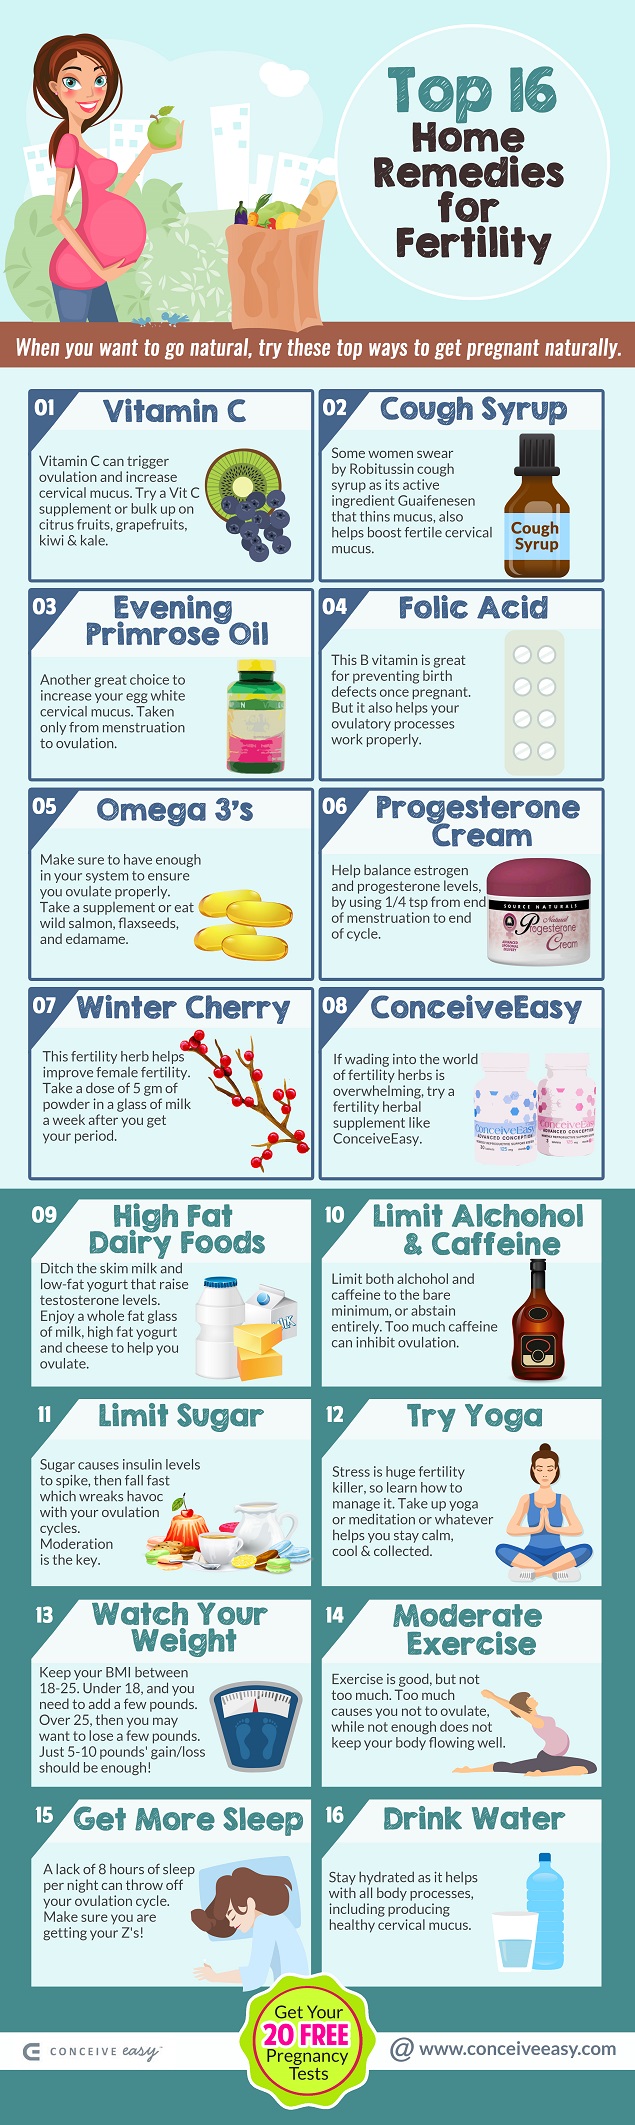 Top 16 Home Remedies for Fertility Infographic